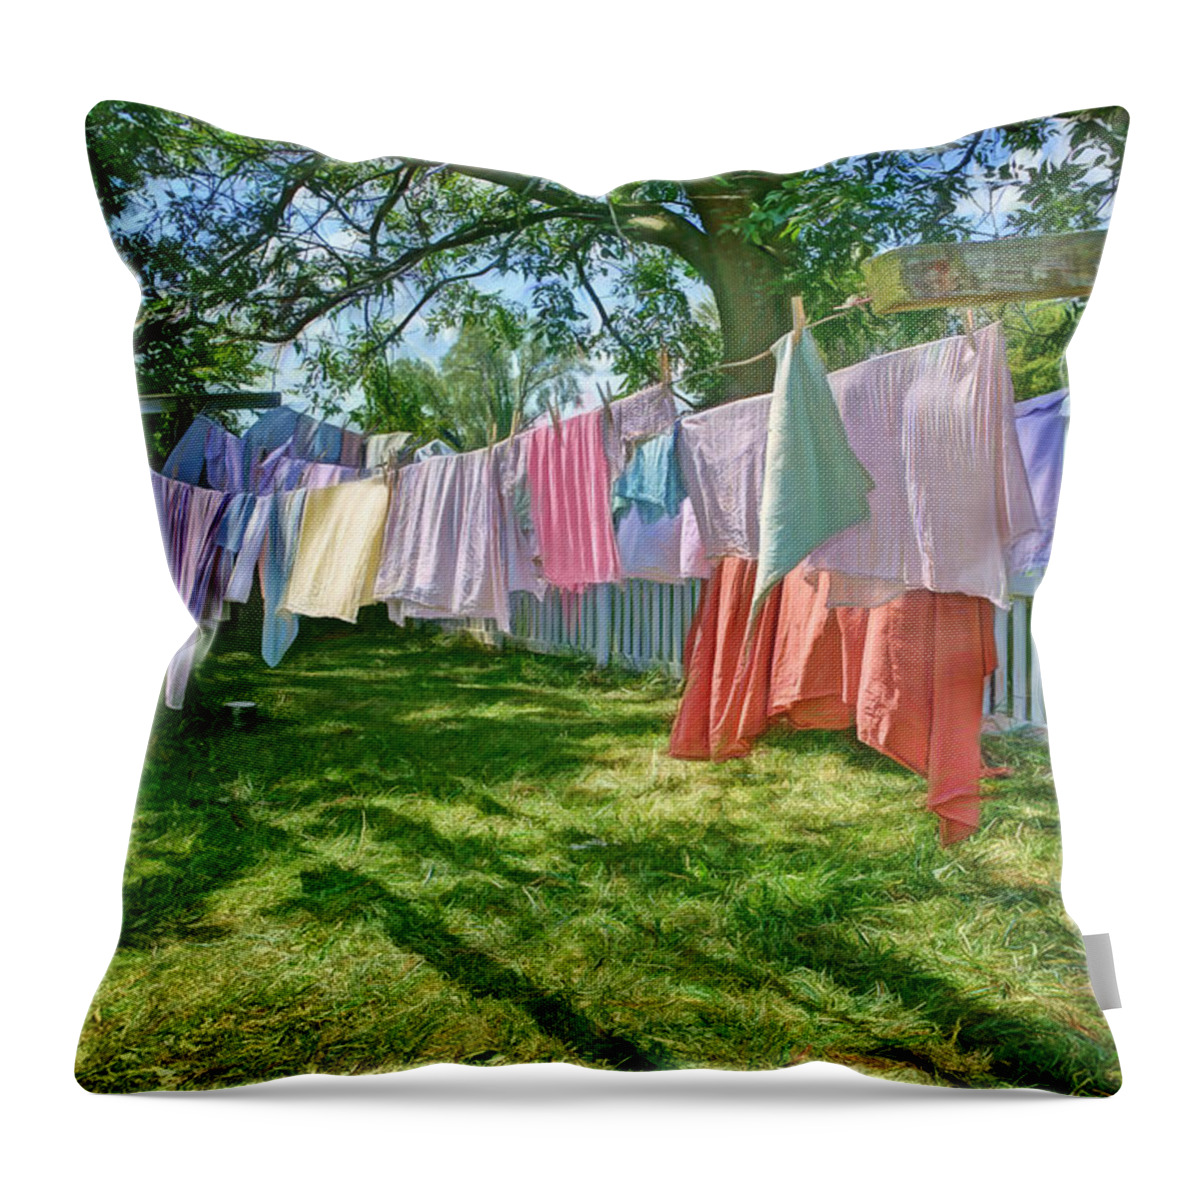 Laundry Throw Pillow featuring the photograph Line Dry - Laundry by Nikolyn McDonald